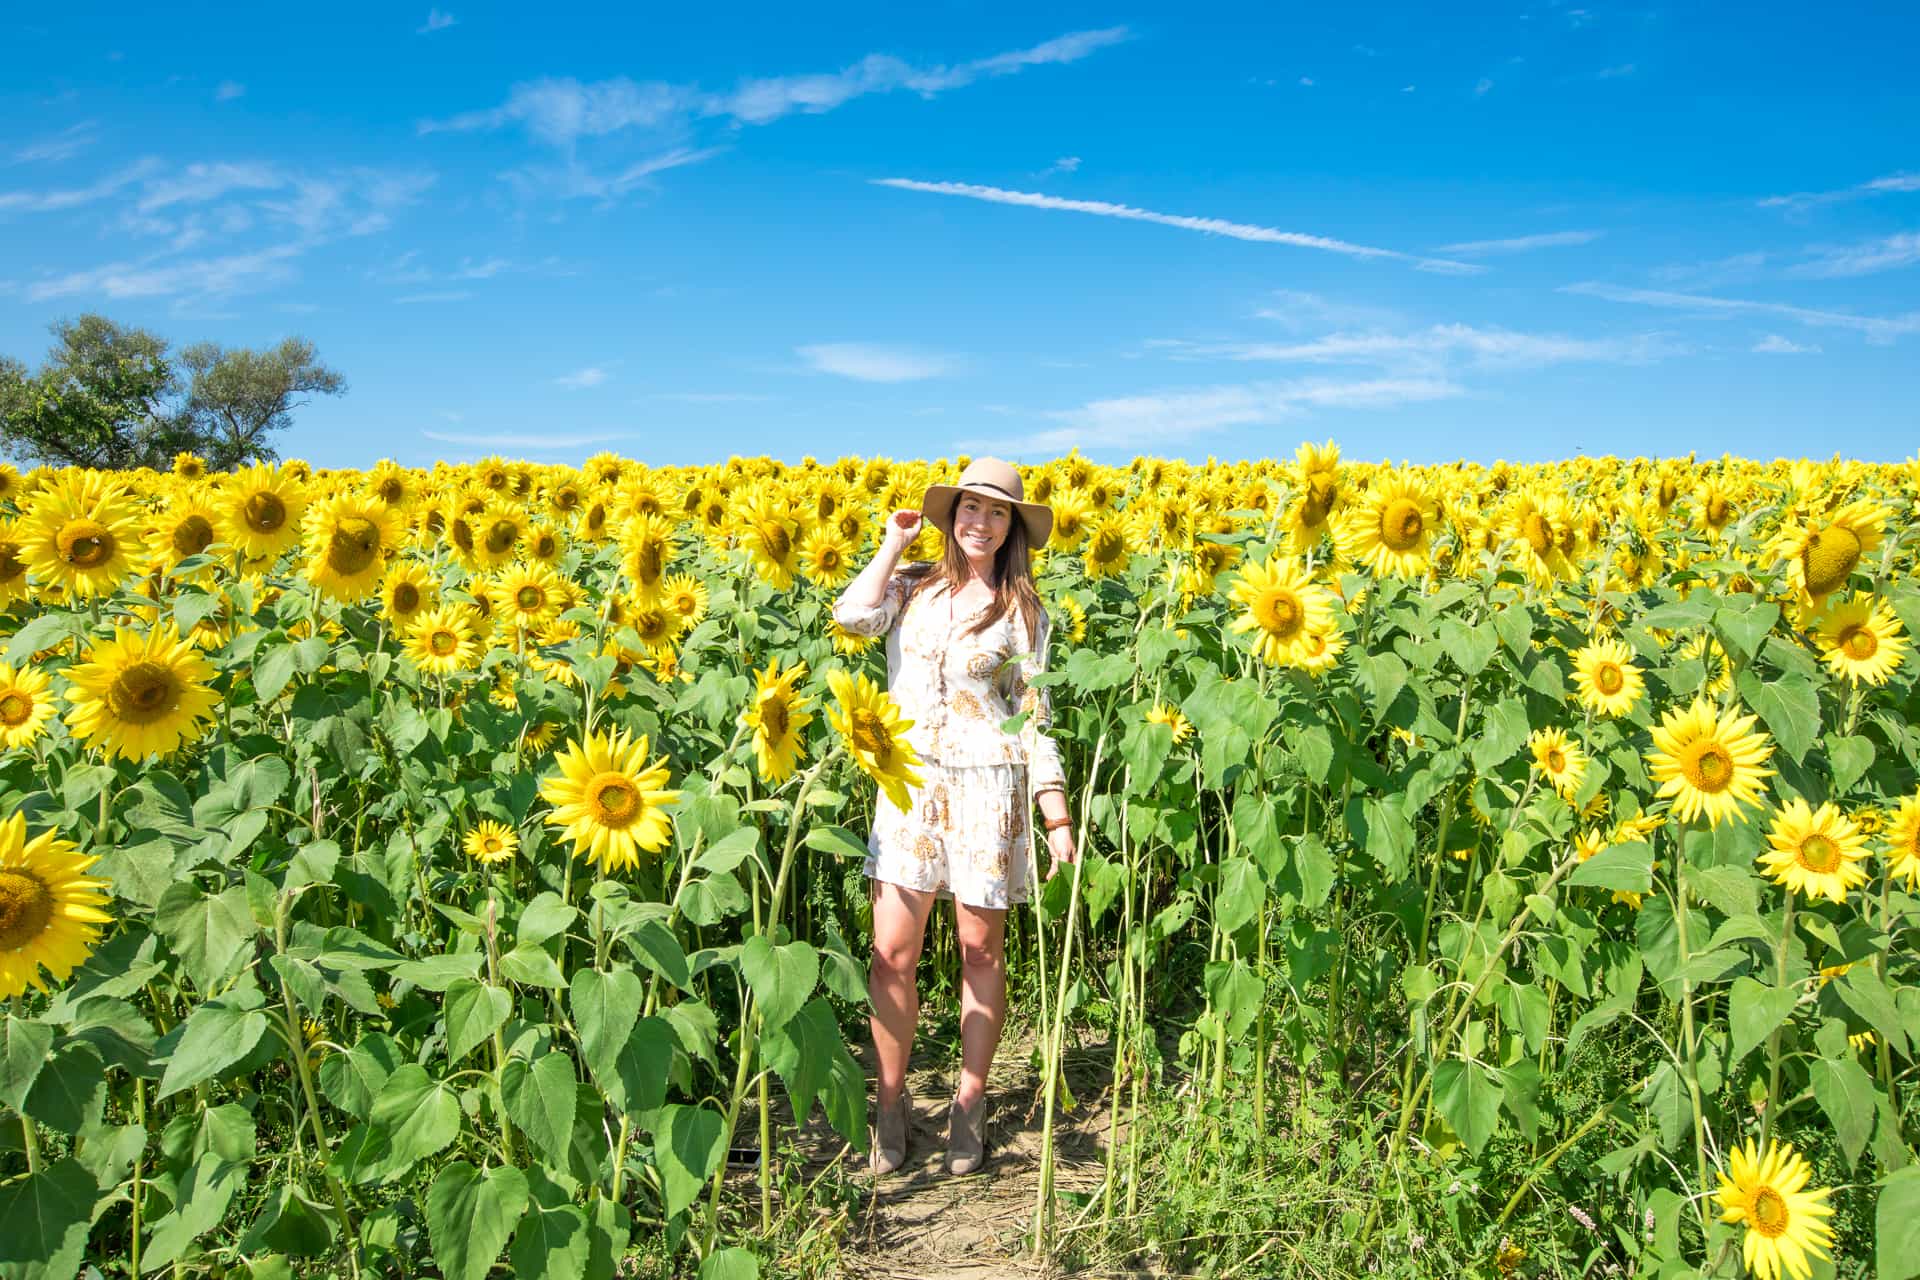 Sunflowers at Colby Farms